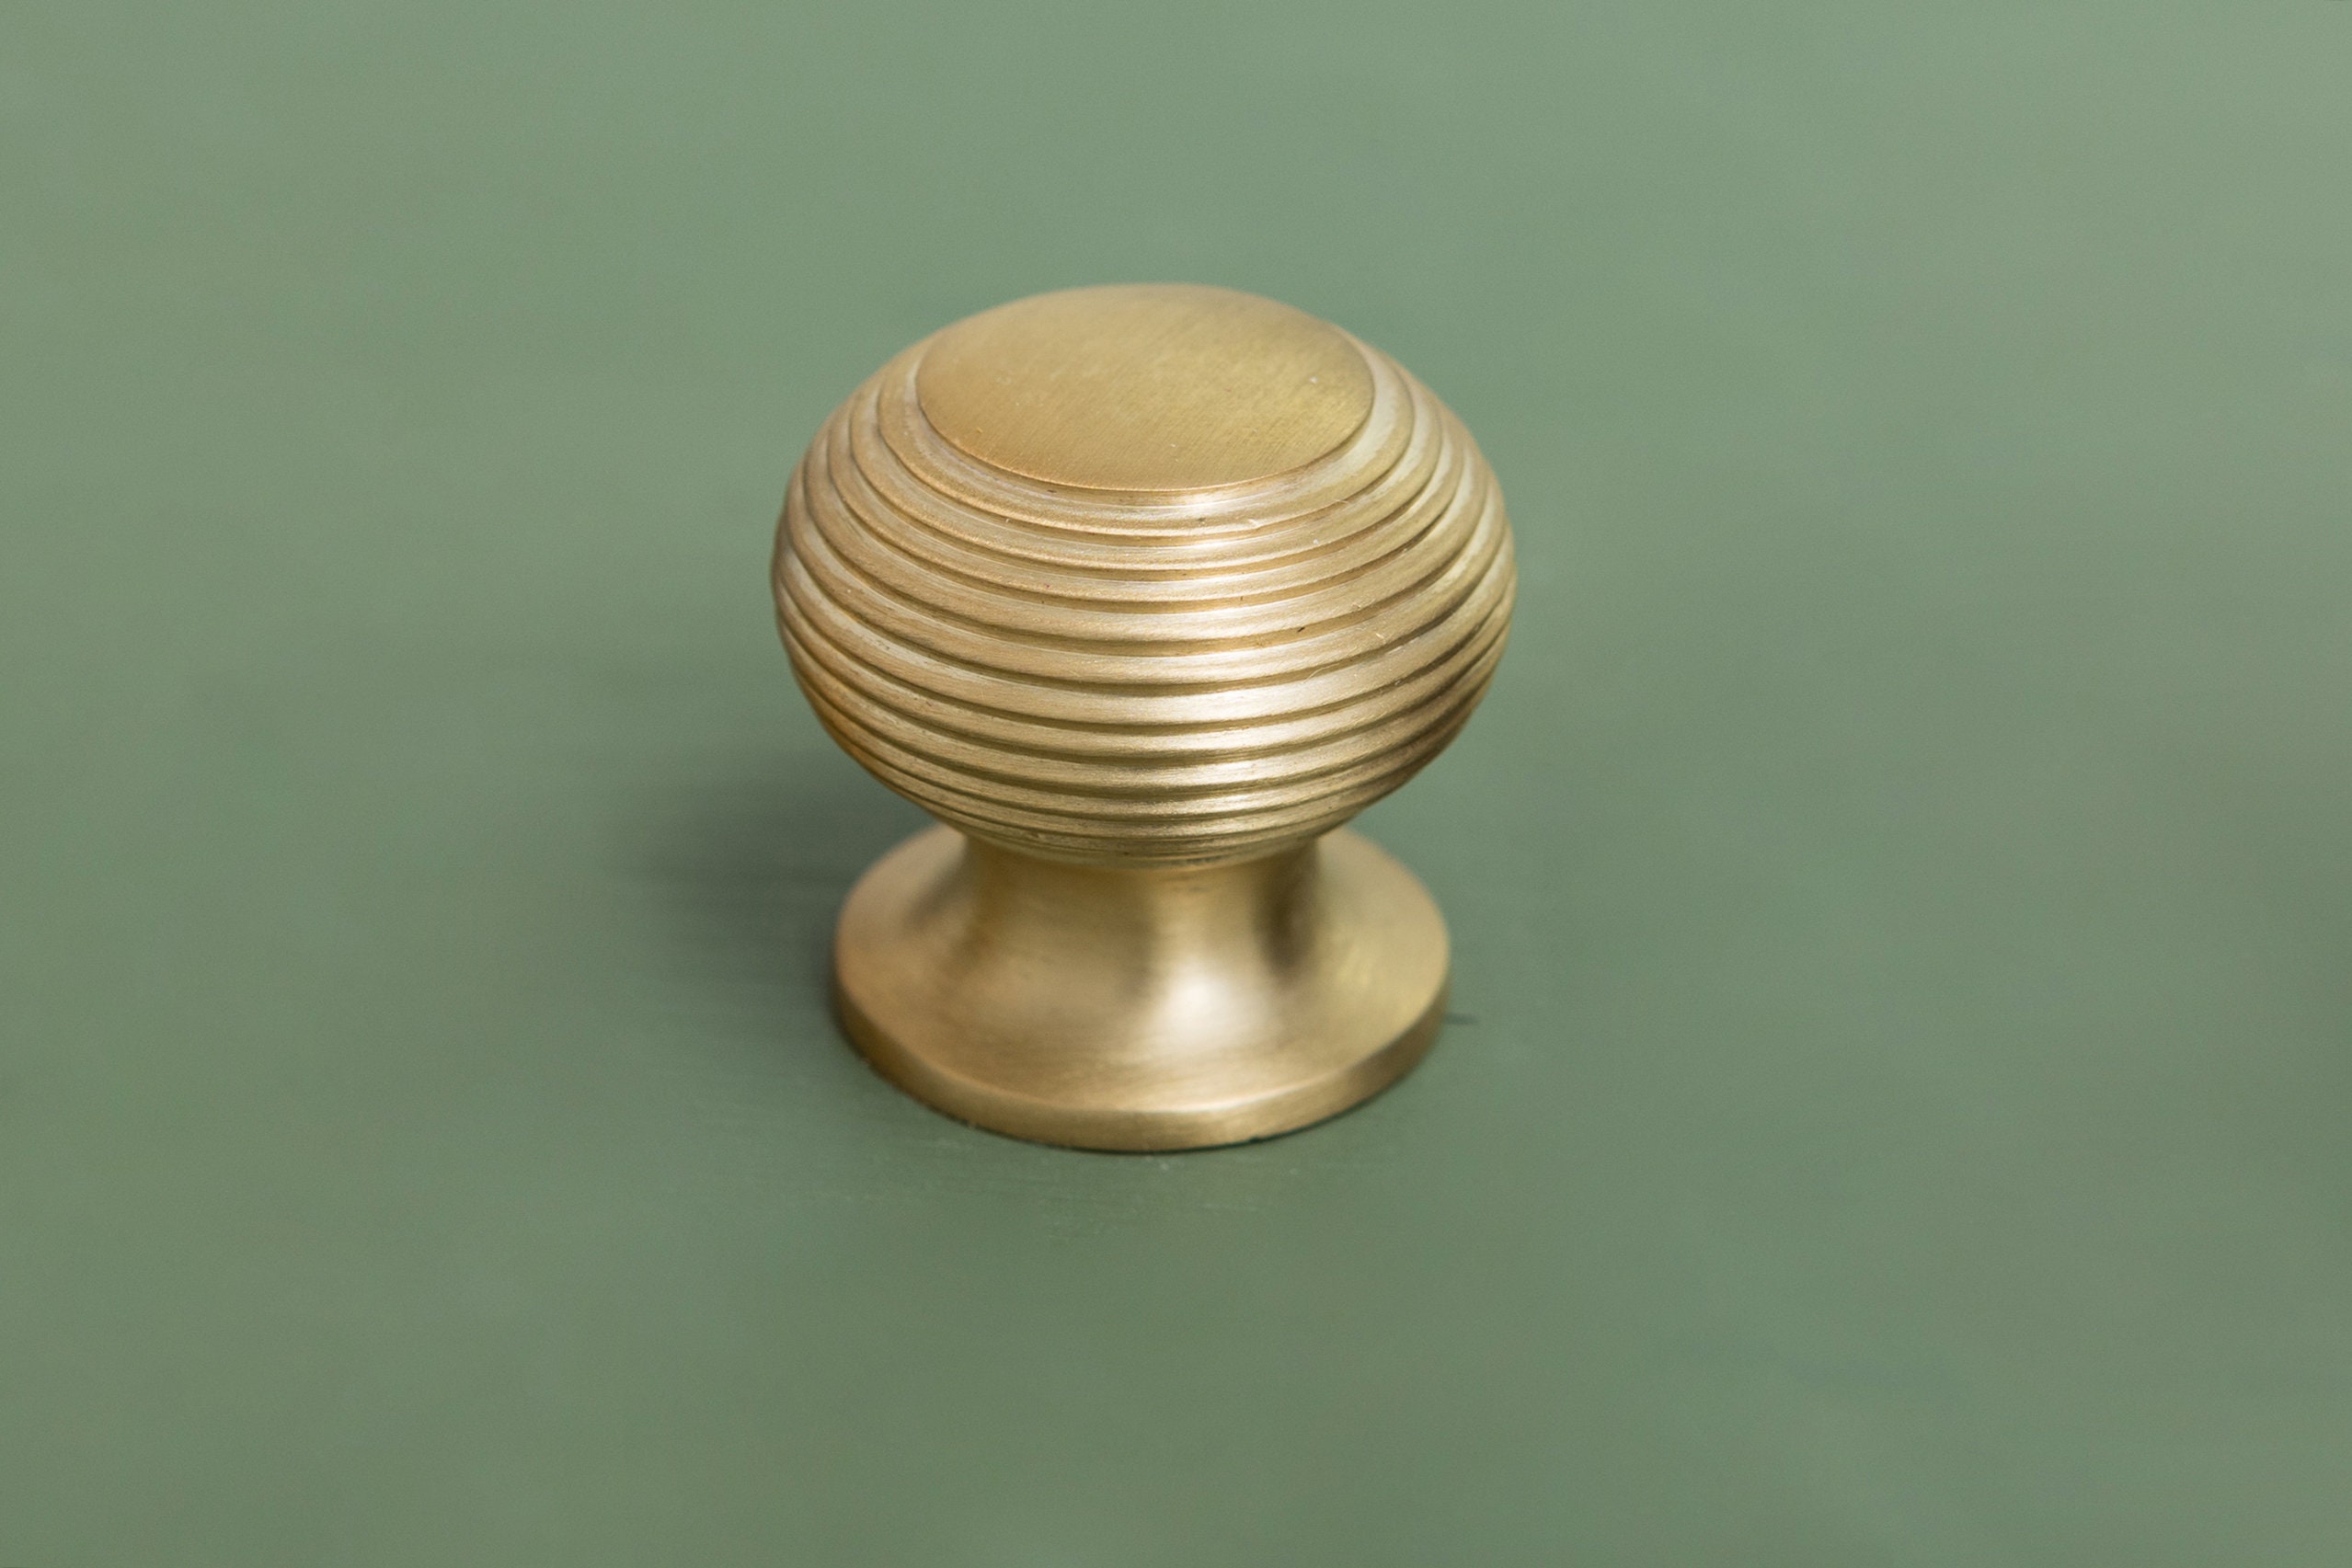 Medium 30mm Antique Brass Beehive / Reeded Cabinet, Drawer or